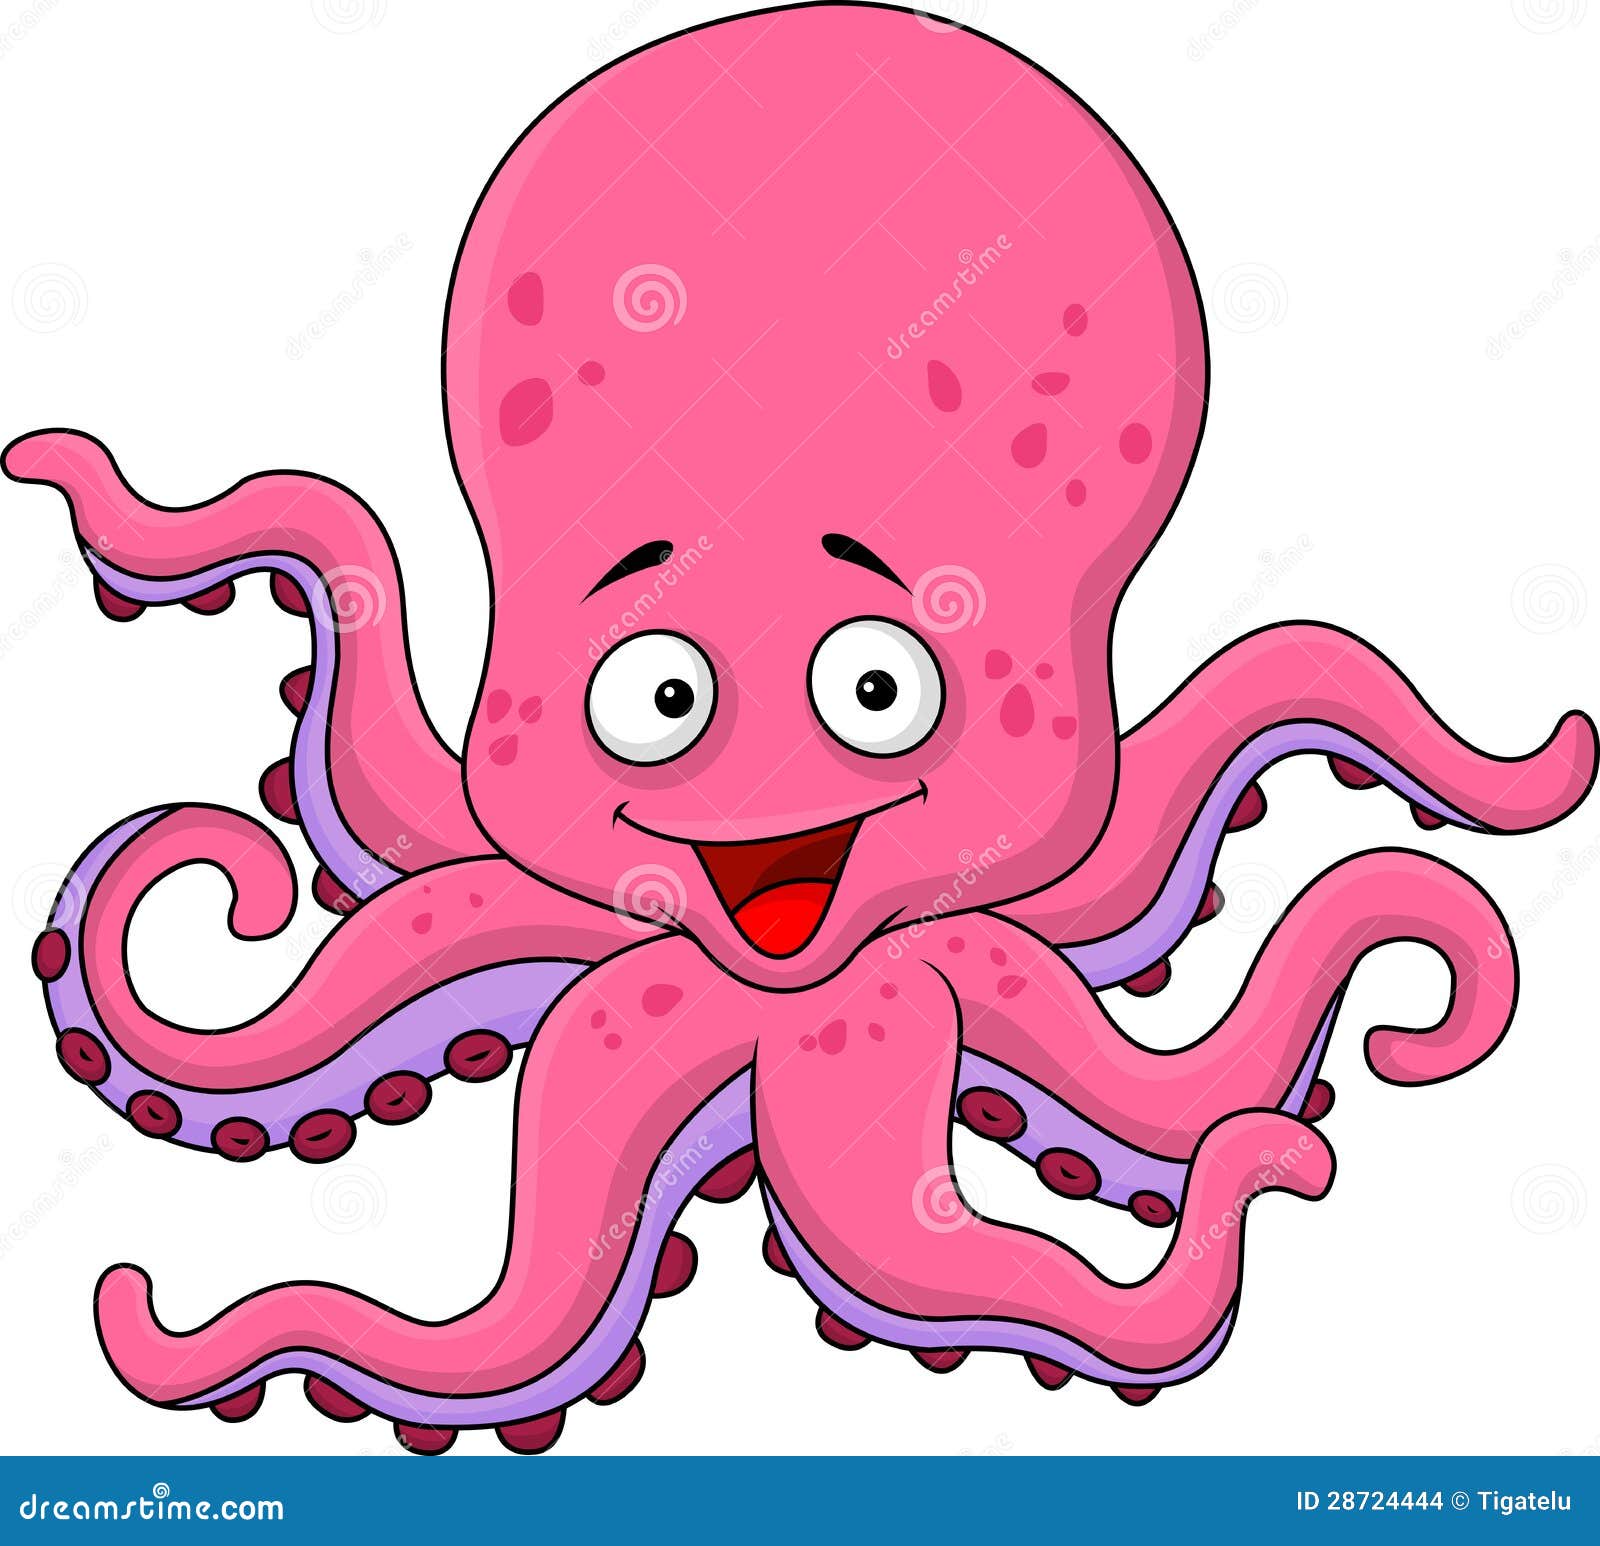 octopus clipart vector pack - photo #49